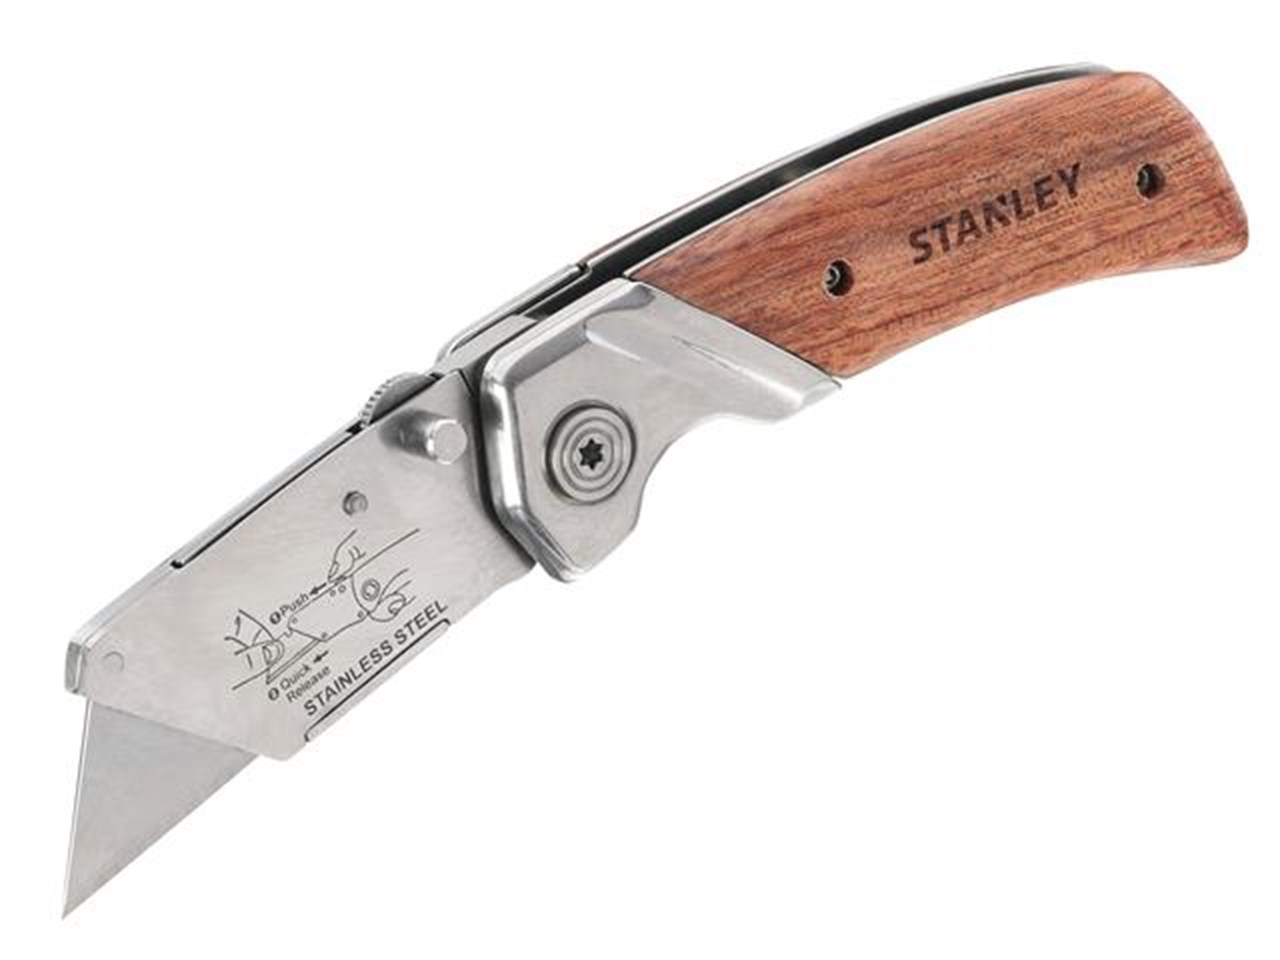 Stanley woodworking knife